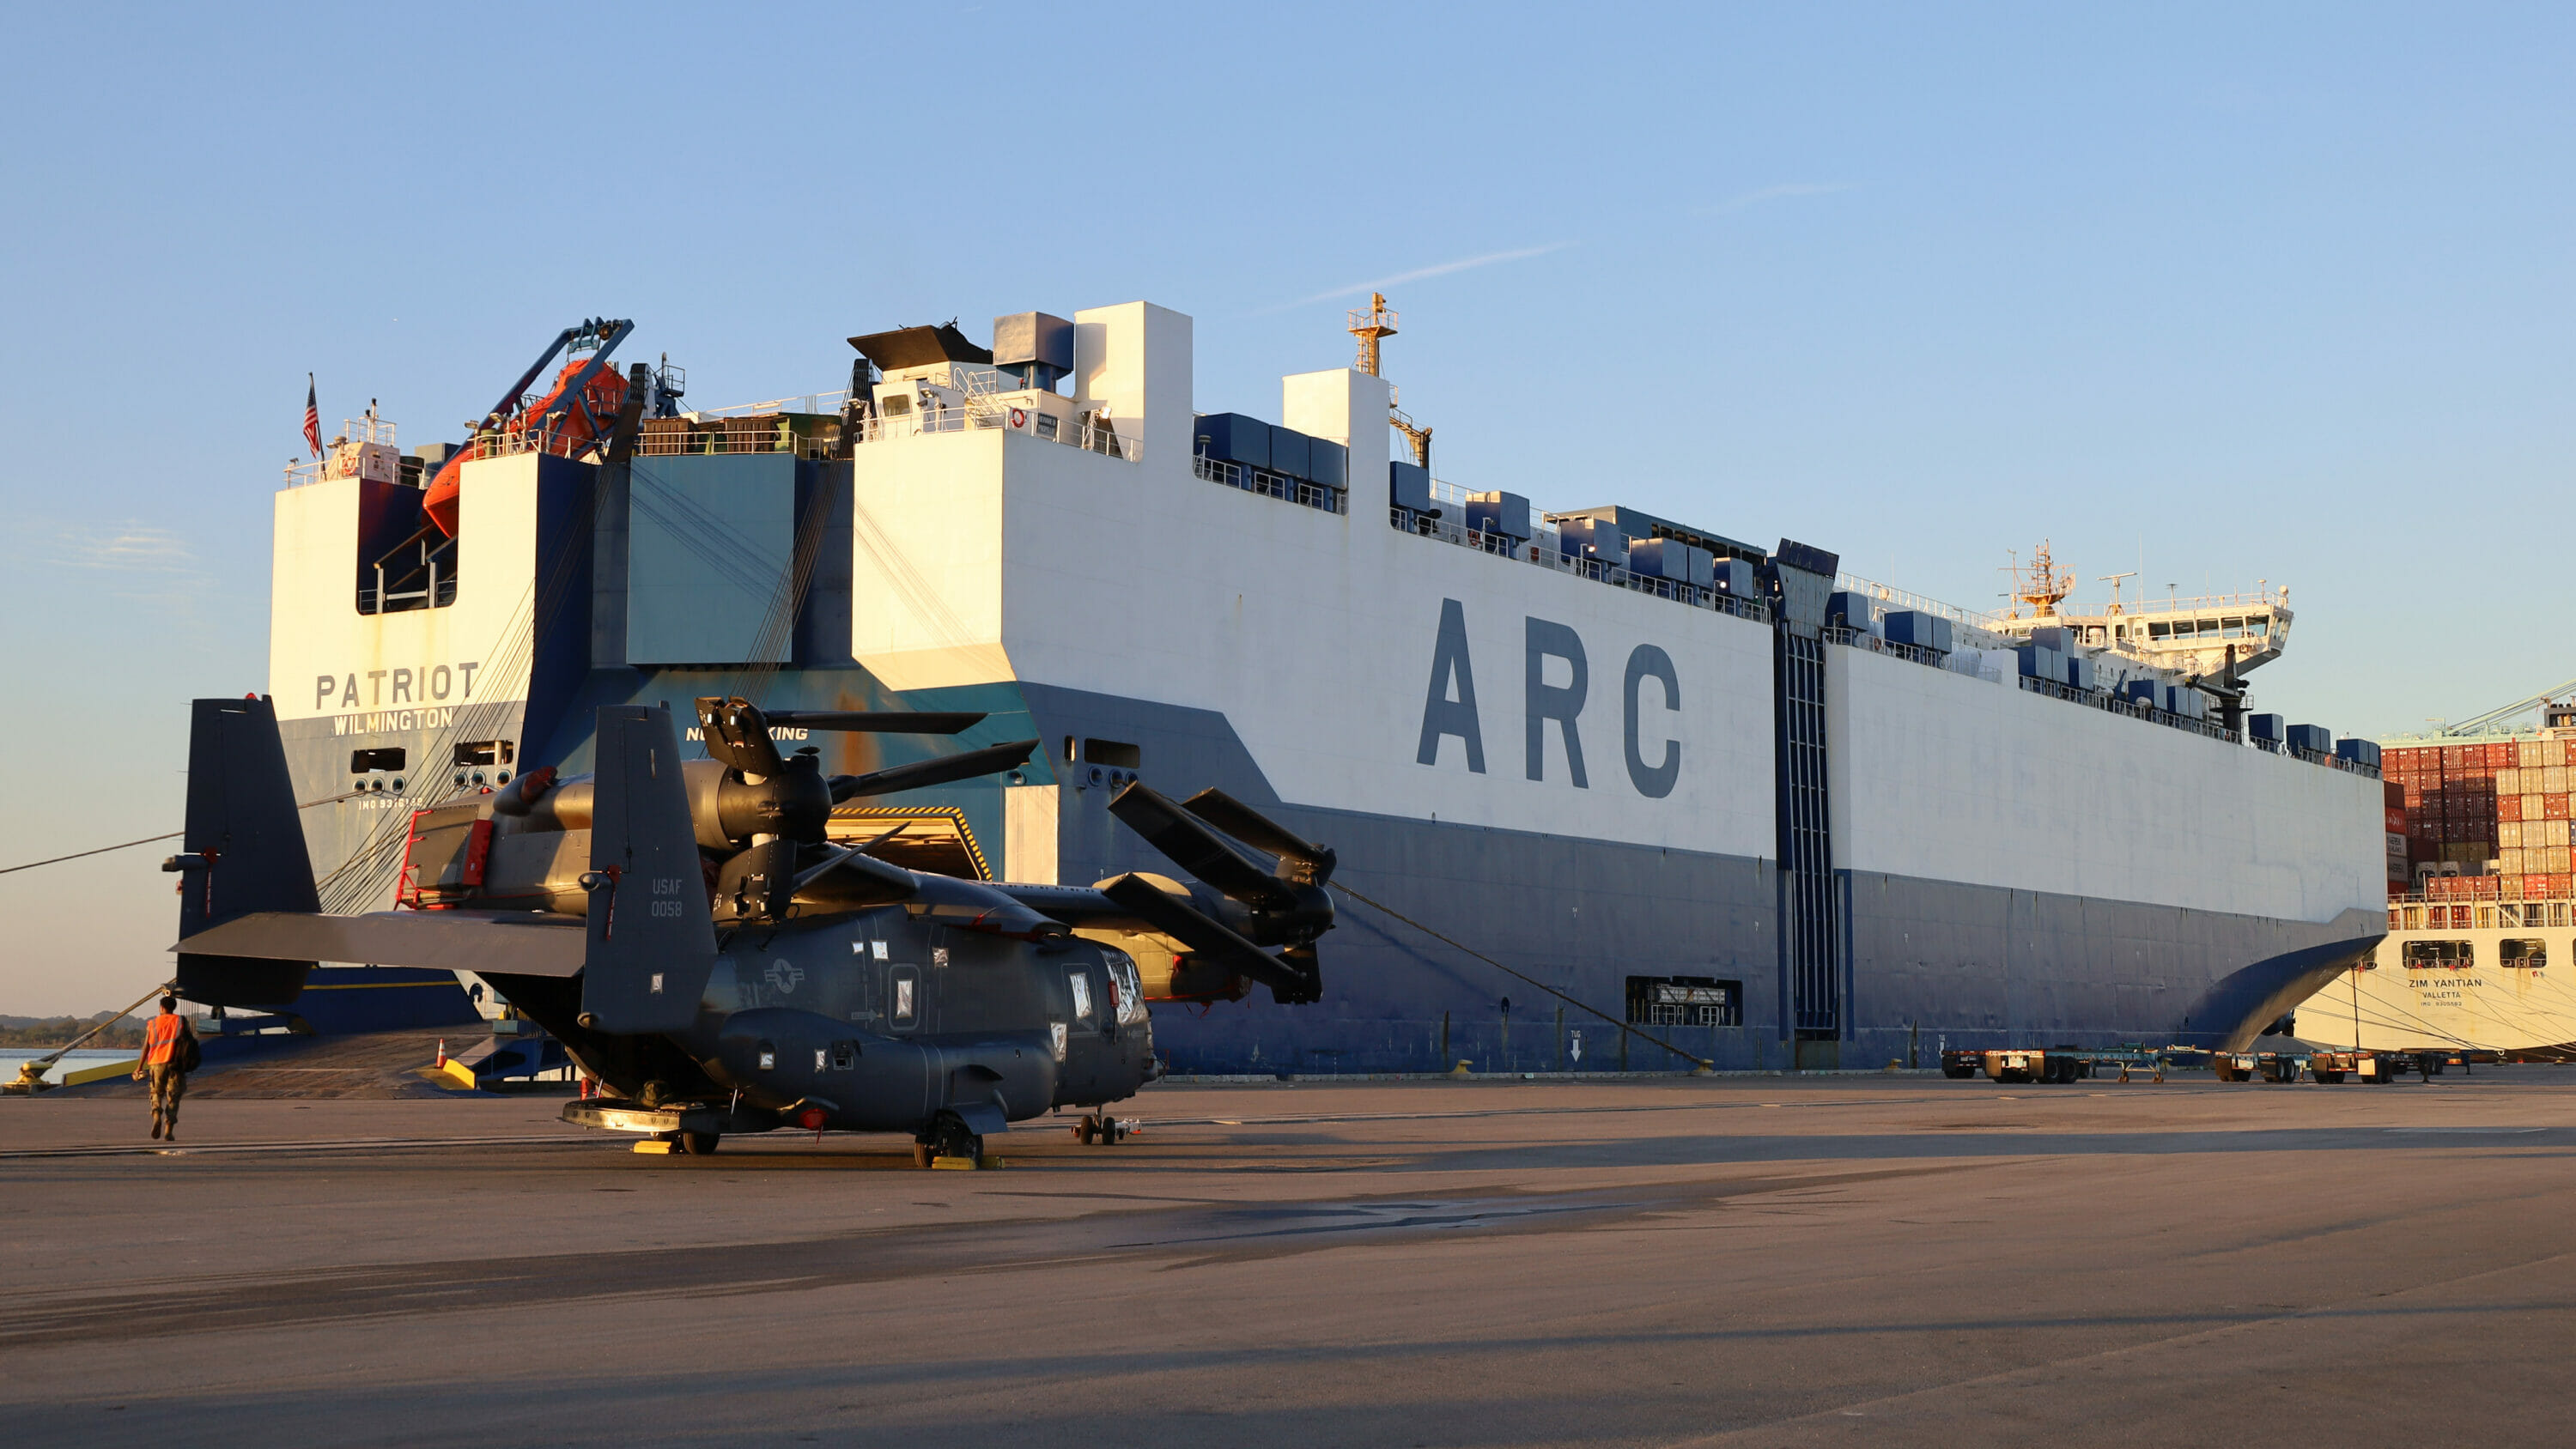 ARC Ship at port loading a Military Helicopter